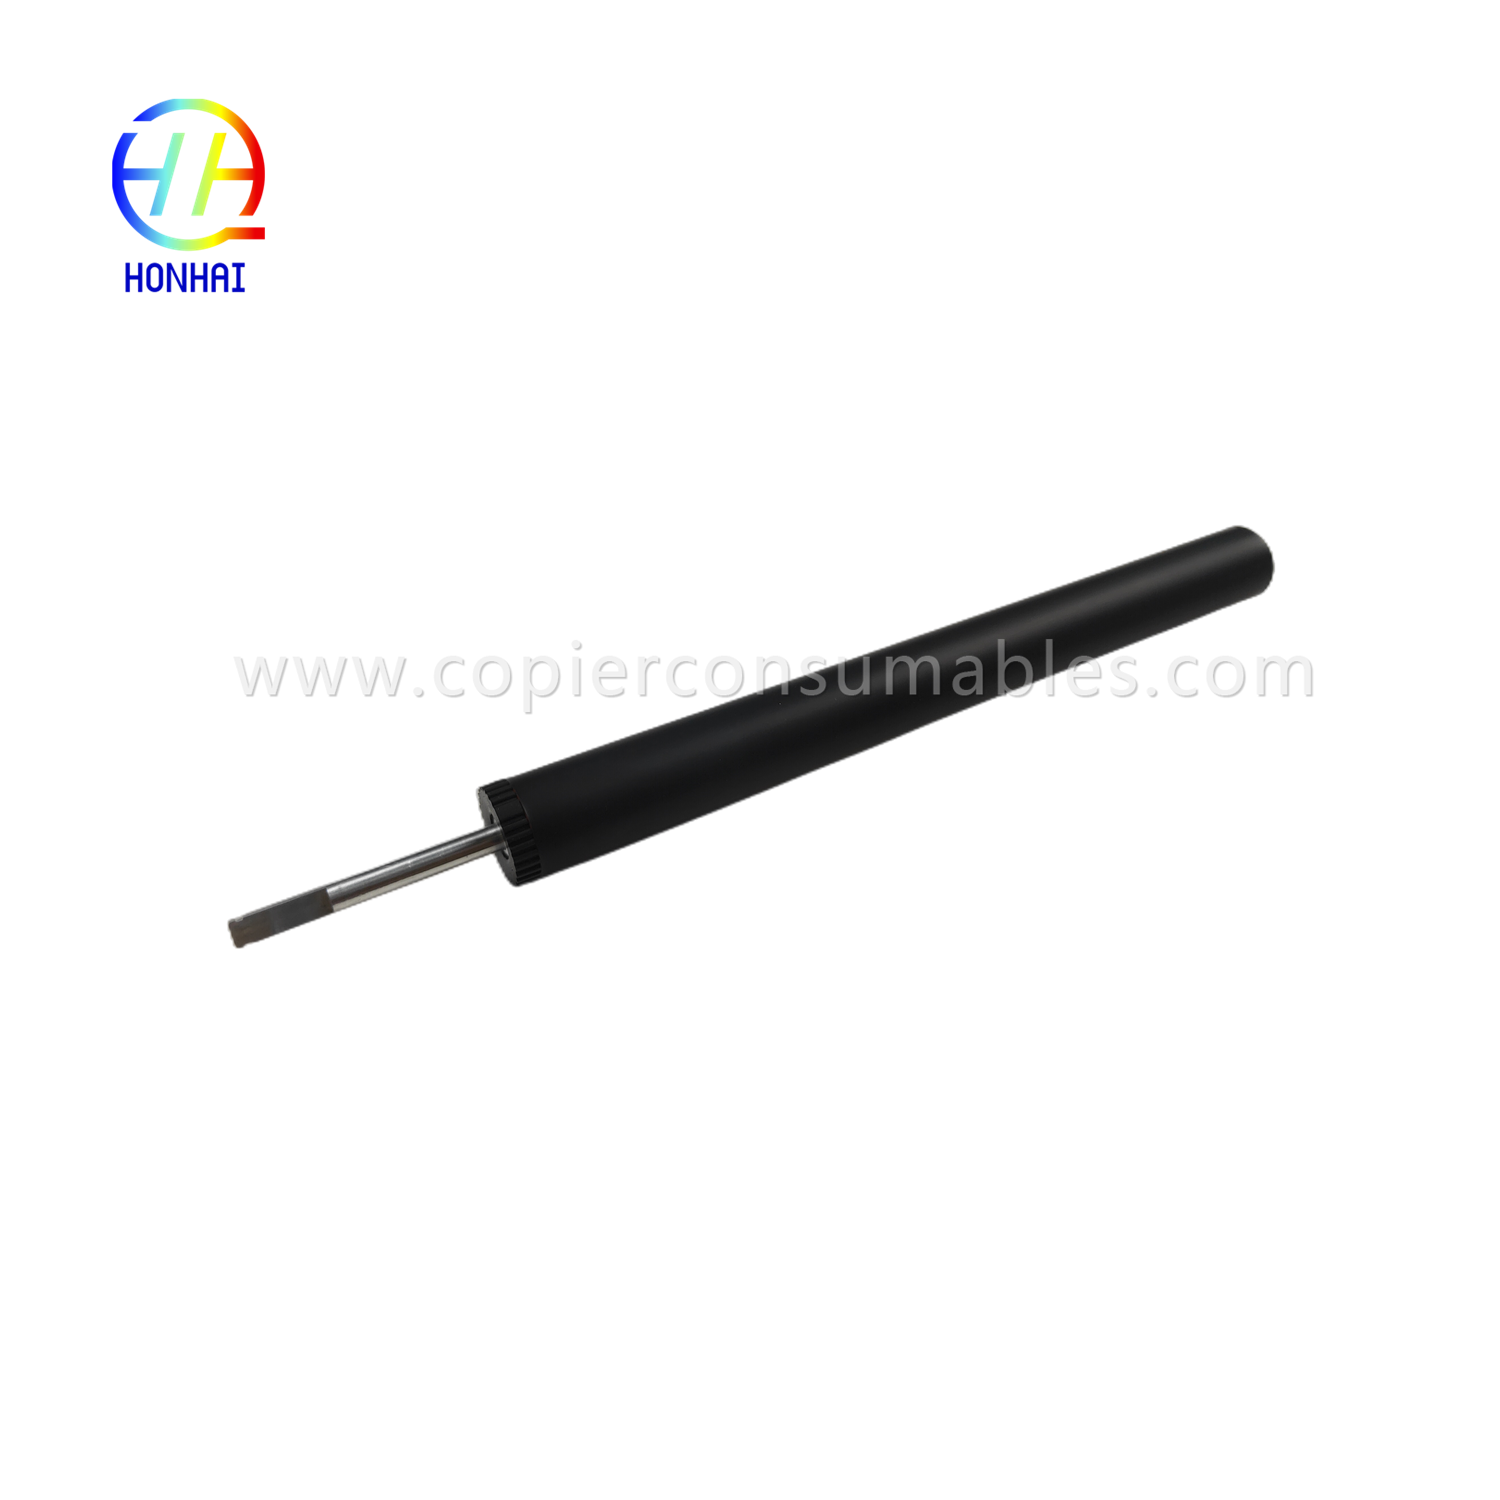 https://c585.goodao.net/low- Pressure-roller-for-canon-ir-1018-1019-1022-1023-1024-1025-low-sleeved- Pressure-roller-product/